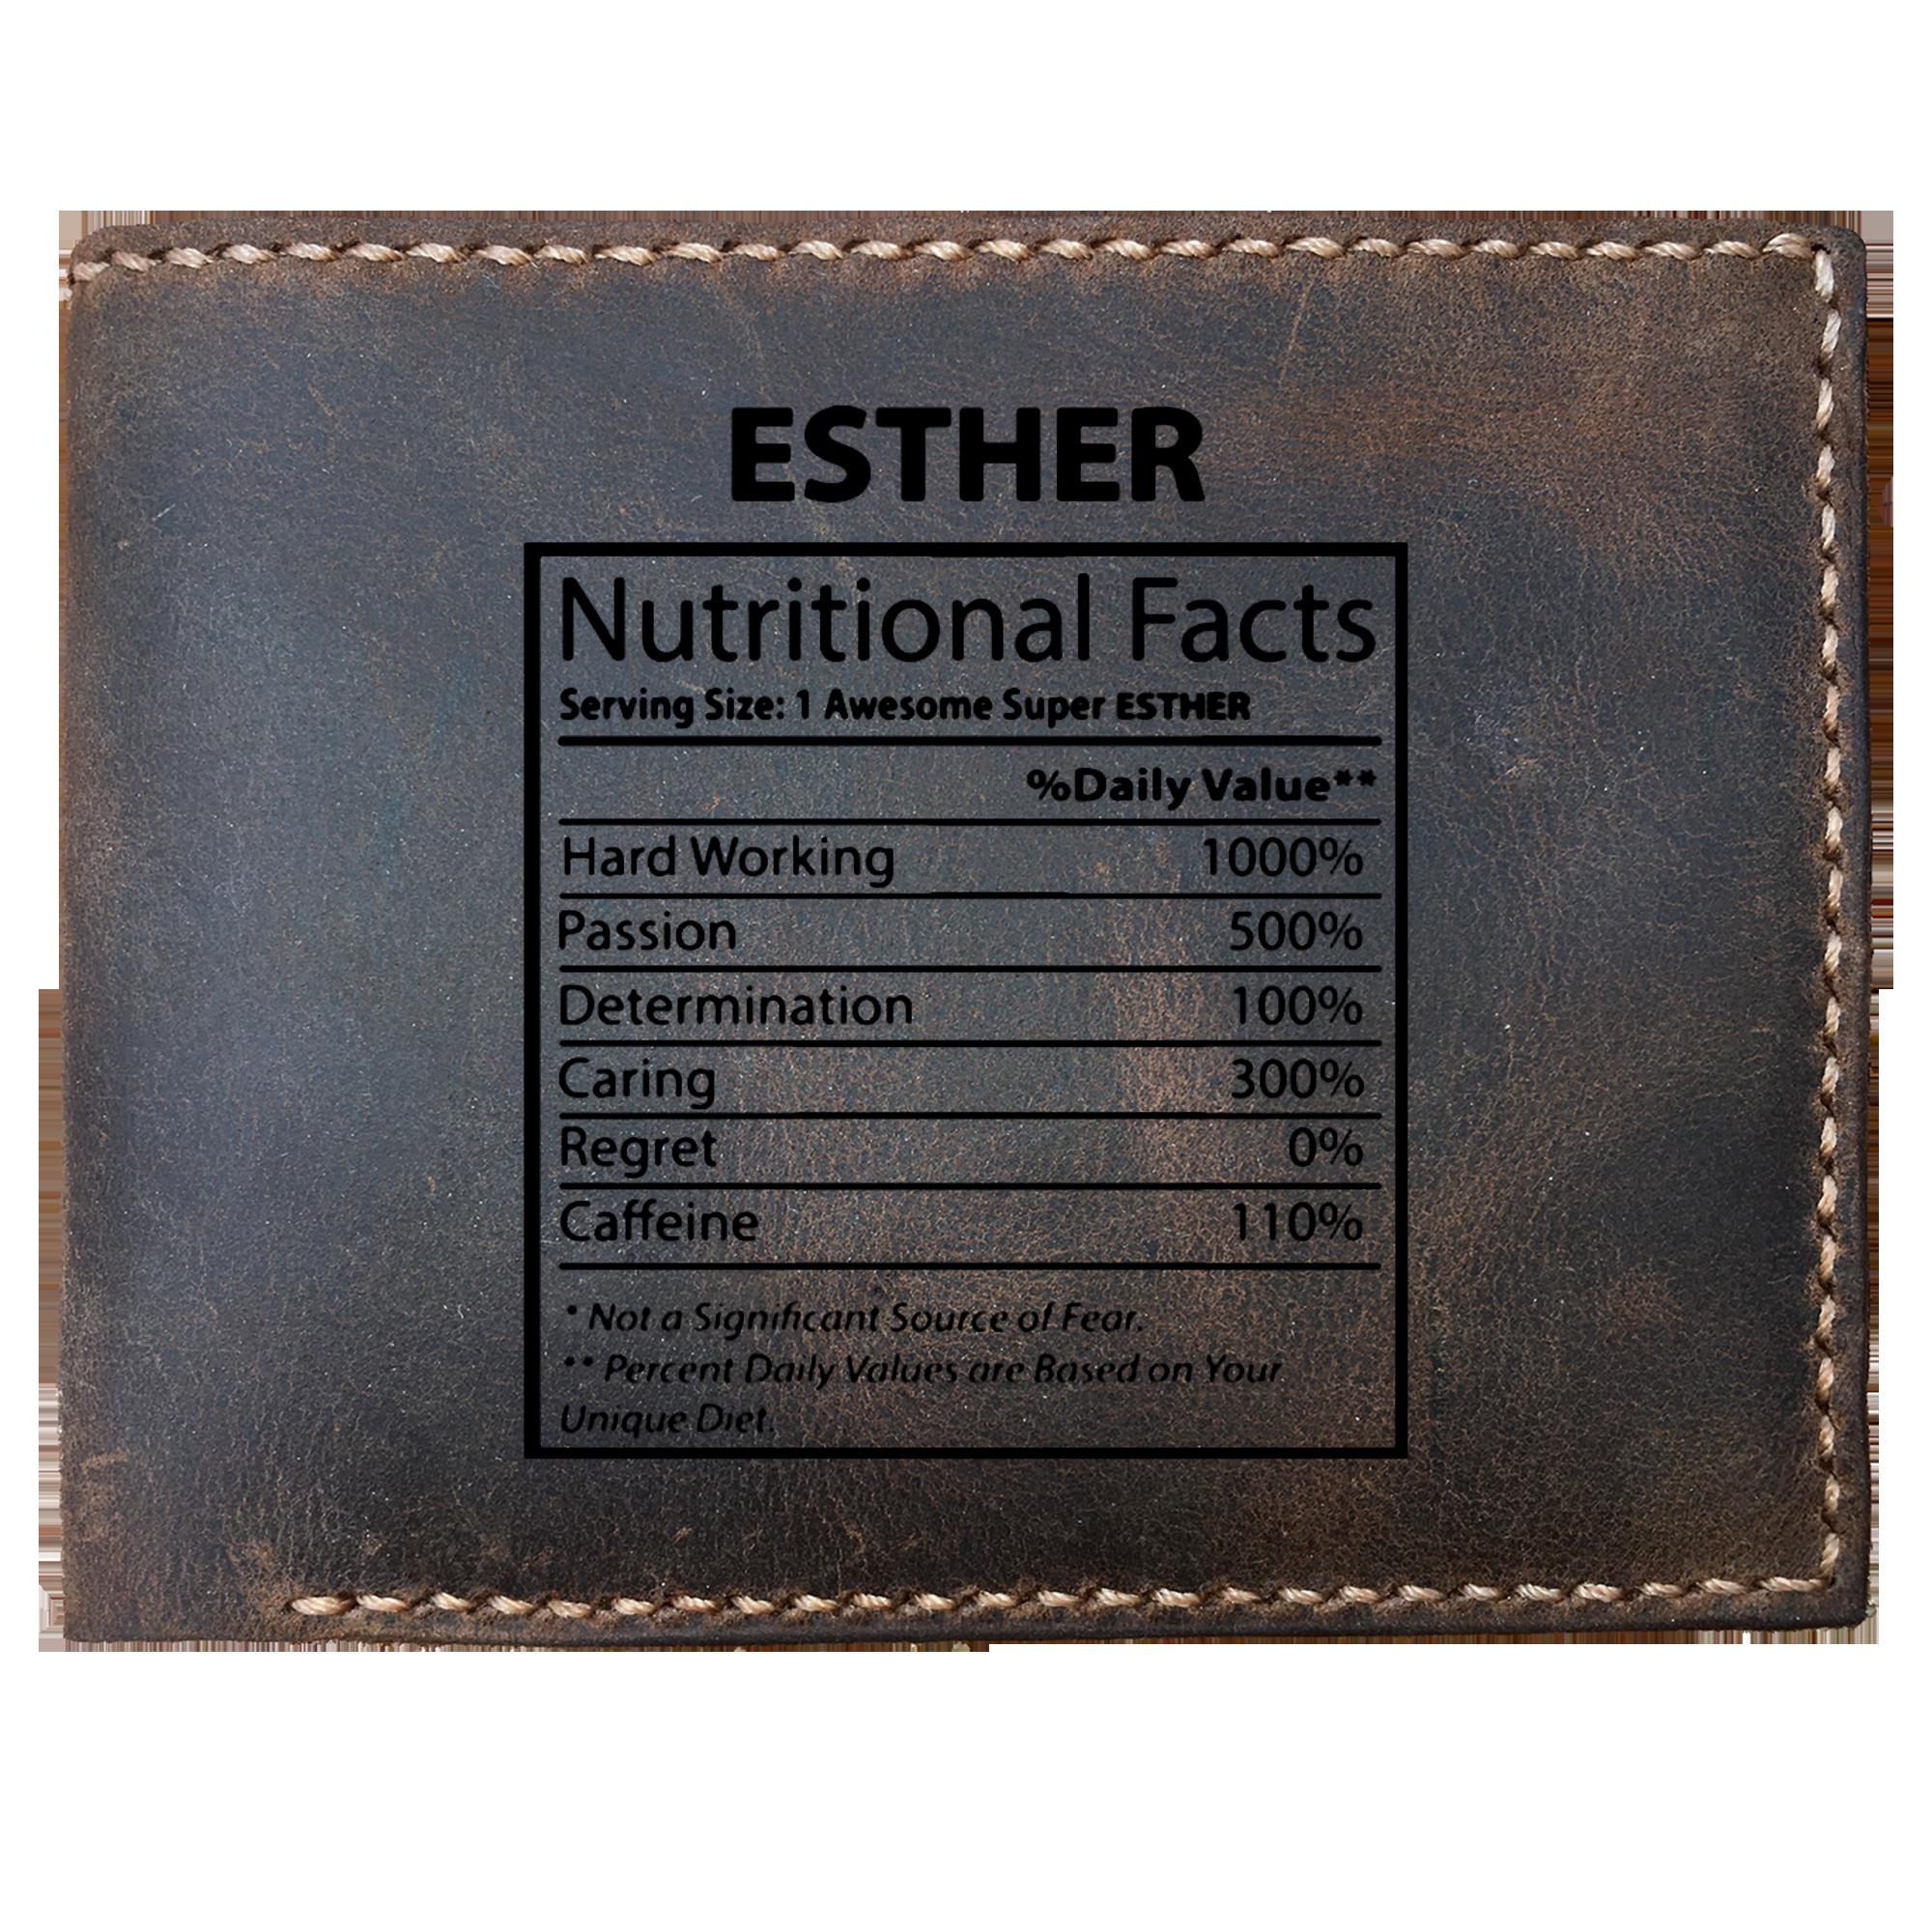 Skitongifts Funny Custom Laser Engraved Bifold Leather Wallet For Men, Esther Nutritional Facts Custom For Esther On Weding Aniversary